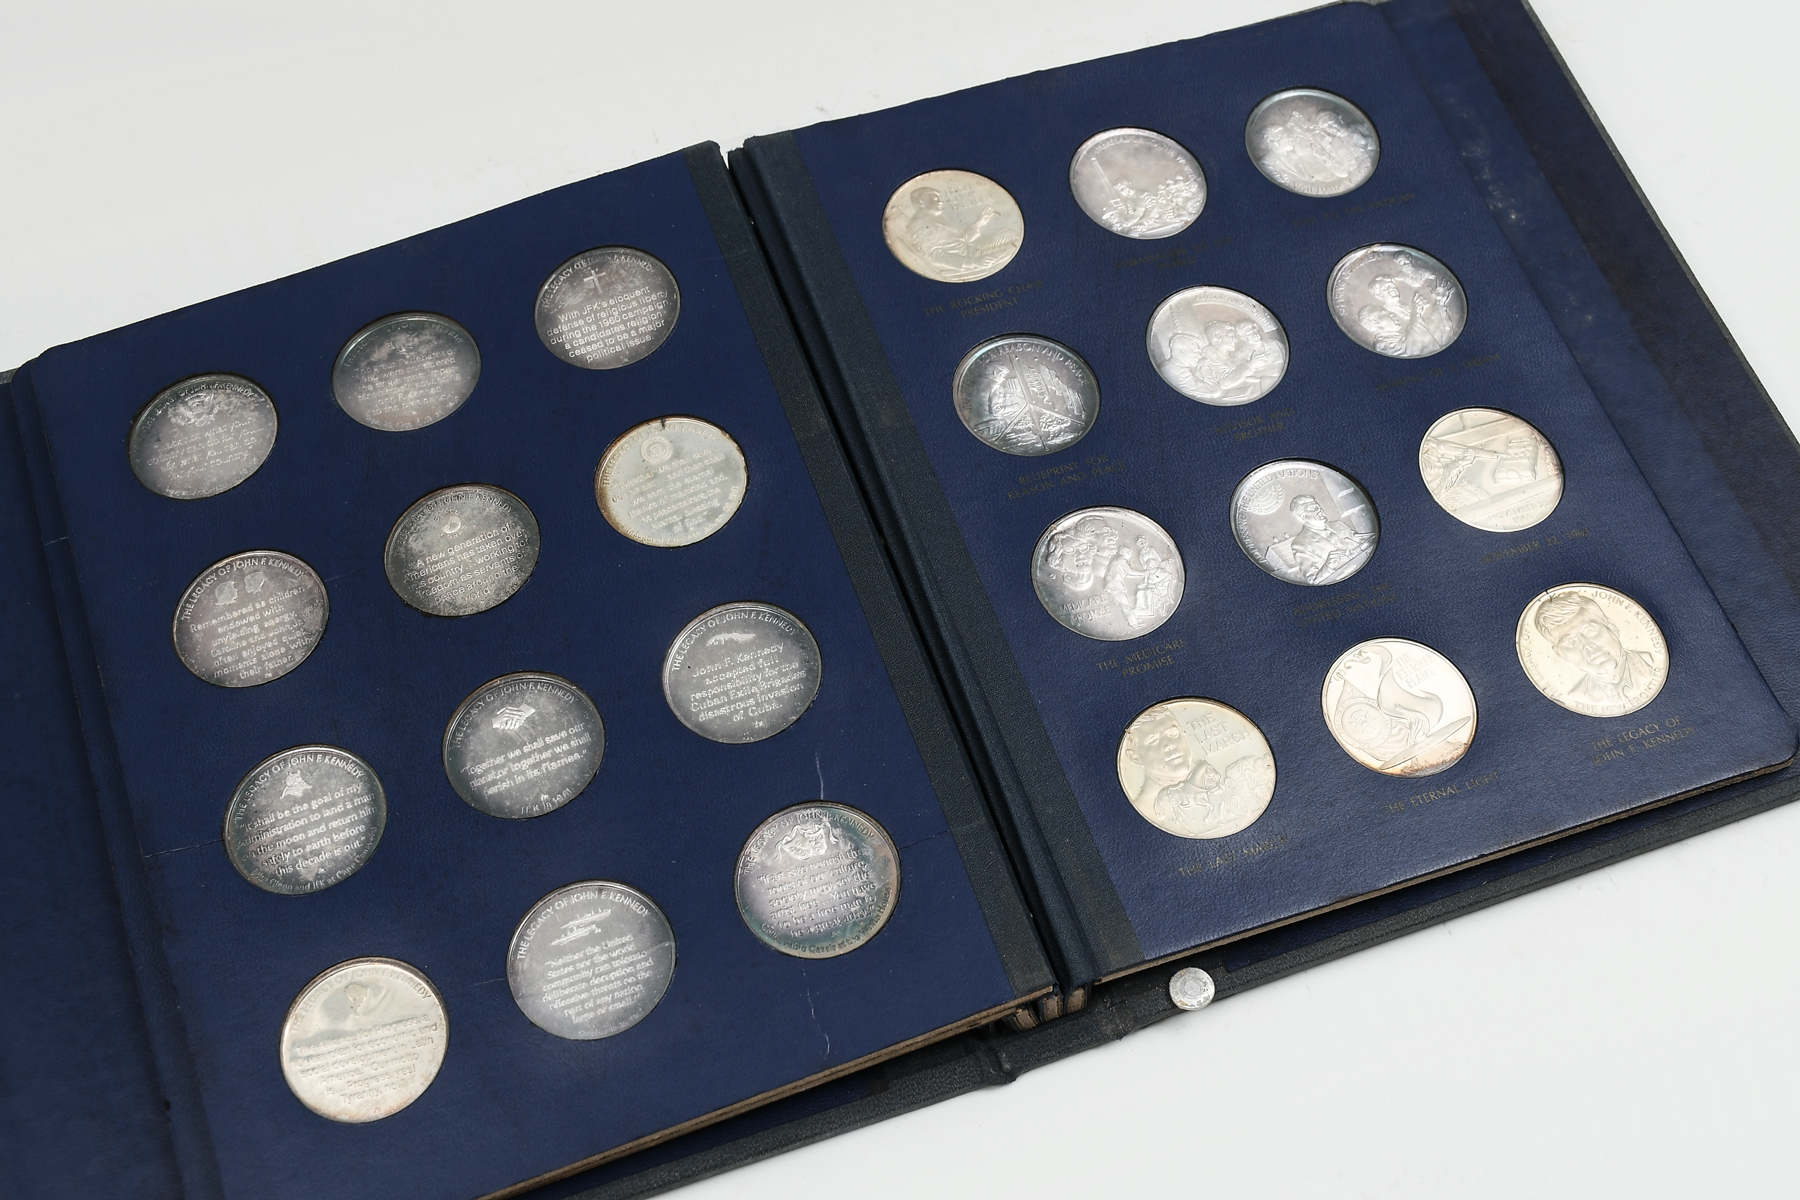 36 .999 SILVER COINS THE LEGACY